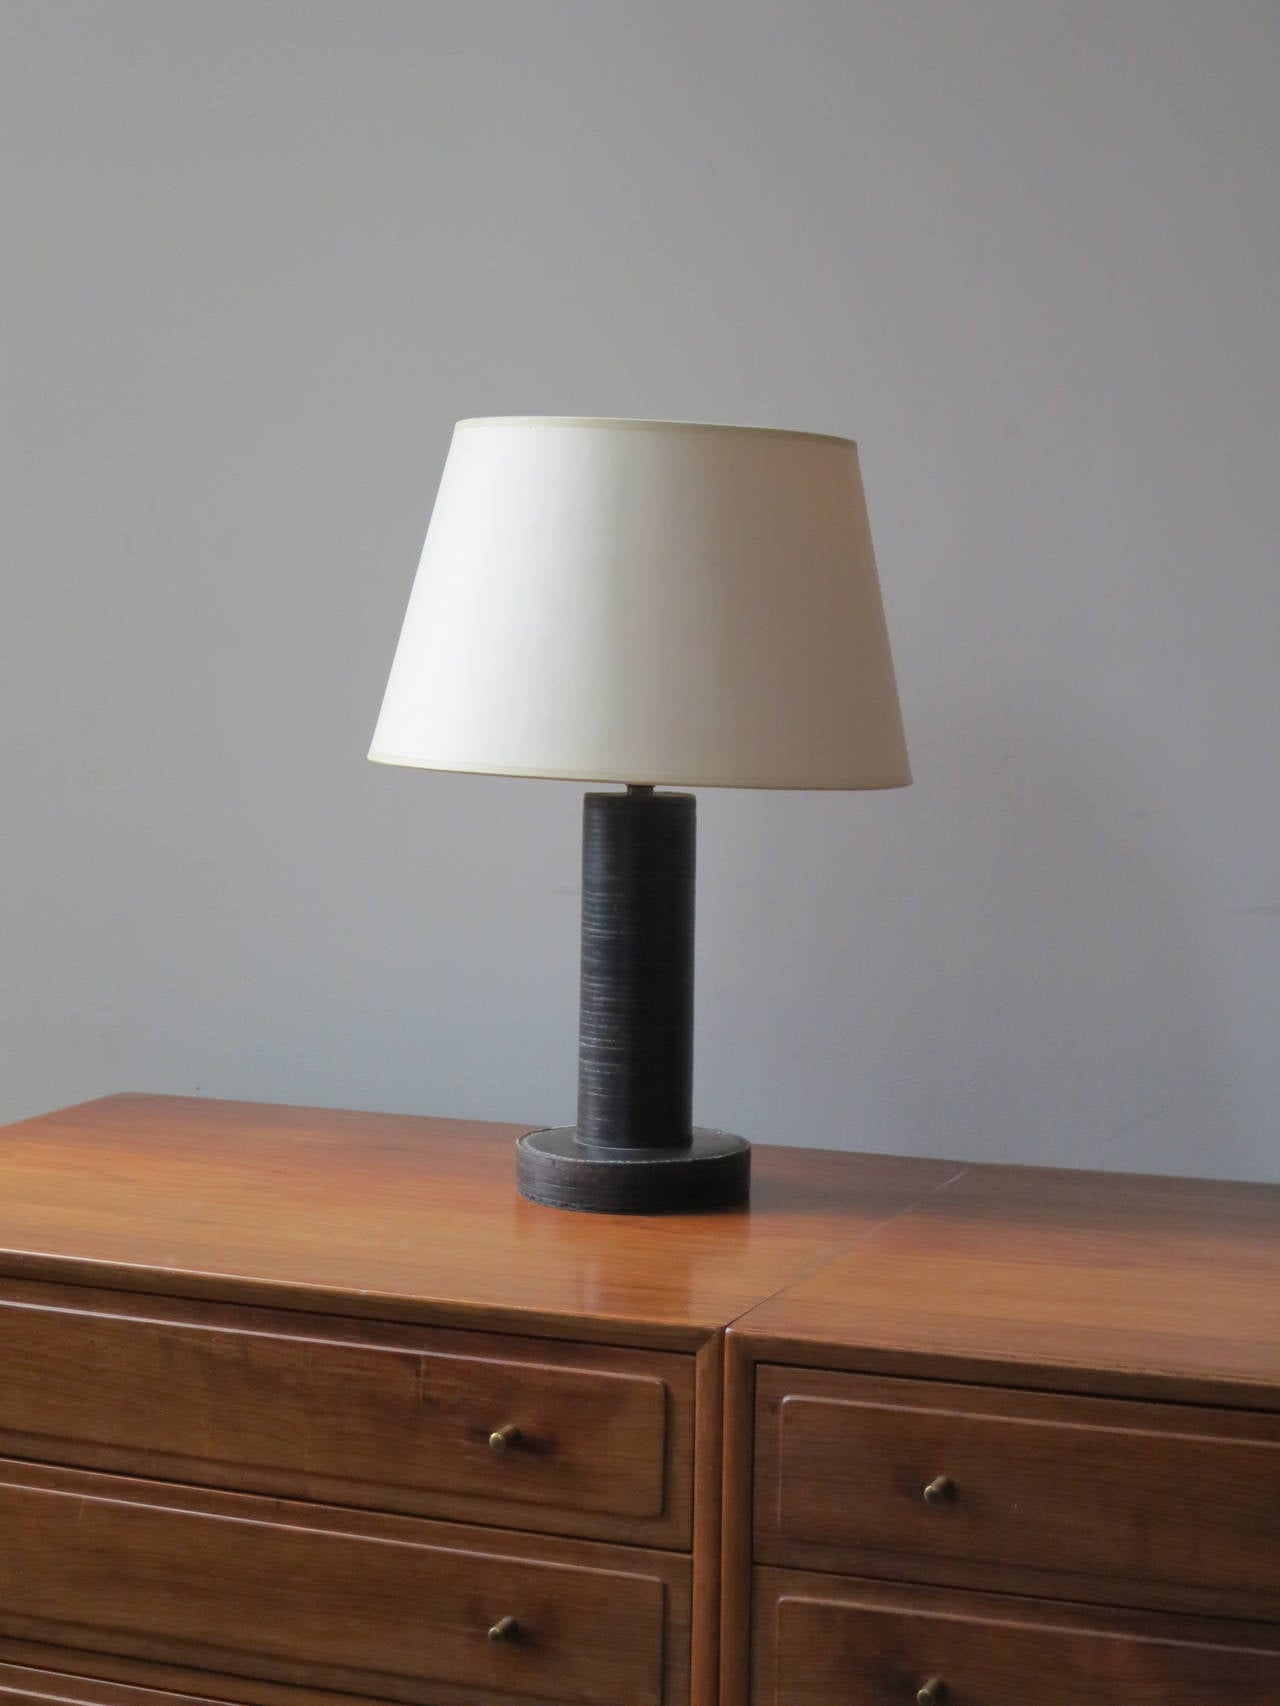 Early table lamp by Paul Dupré-Lafon and Hermès with base and cylinder in black stacked leather.

Stamped in gold on the underside of the base: HERMÈS-PARIS / DÉPOSÉ.

Height without shade: 8 1/4 inches (21 cm.)
Height with shade: 16 inches (40.7